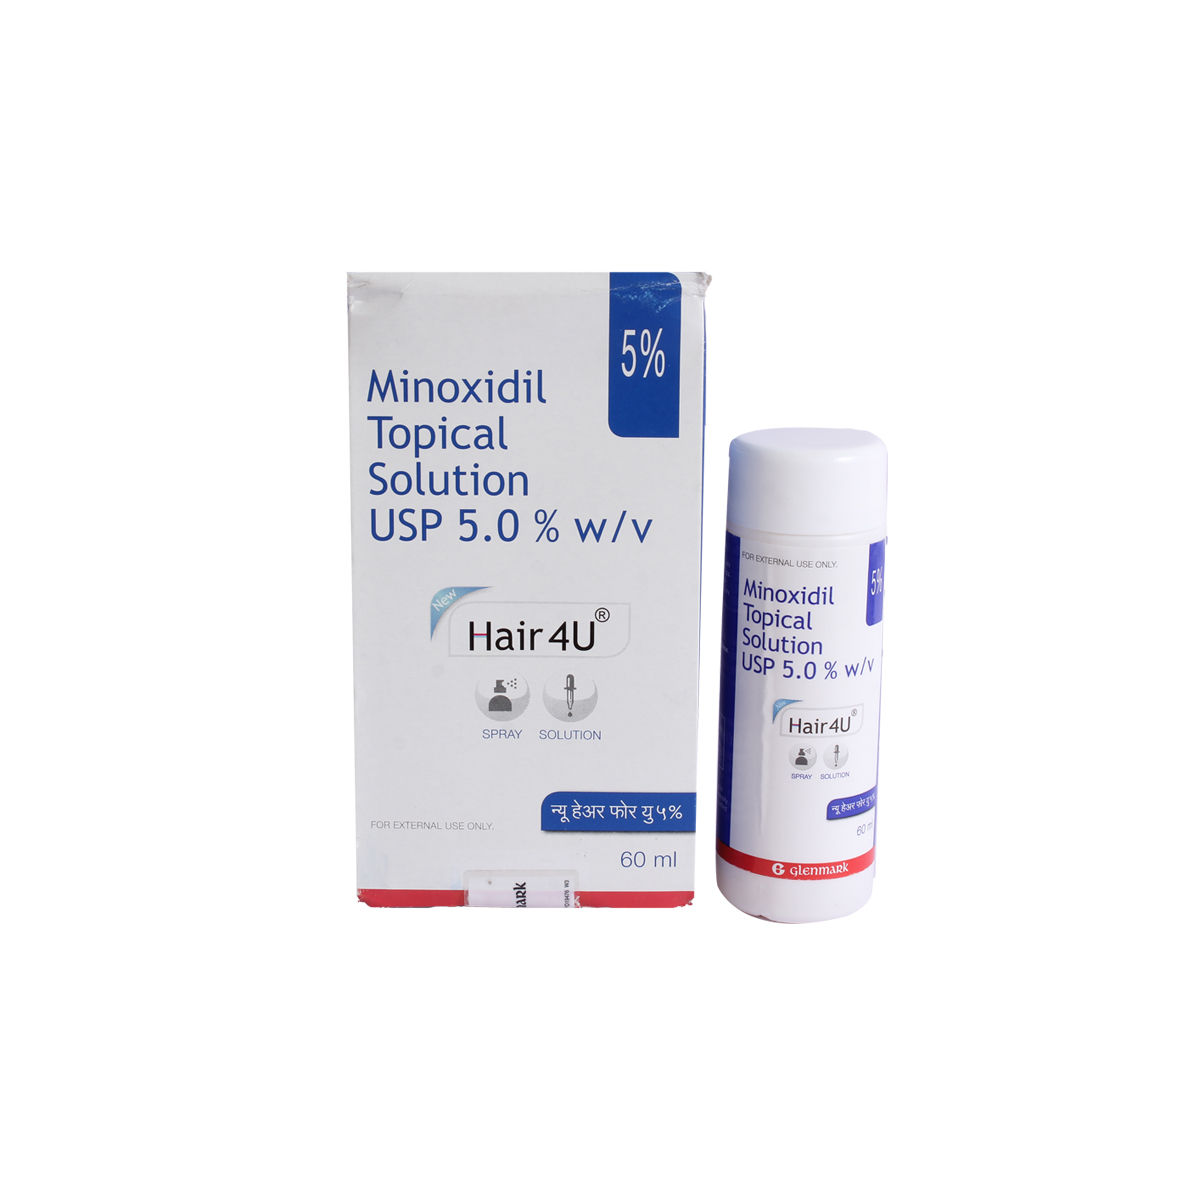 57 Working Days Hair4u  Minoxidil  Aminexil Topical Solution  Worldwide Packaging Size Bottle